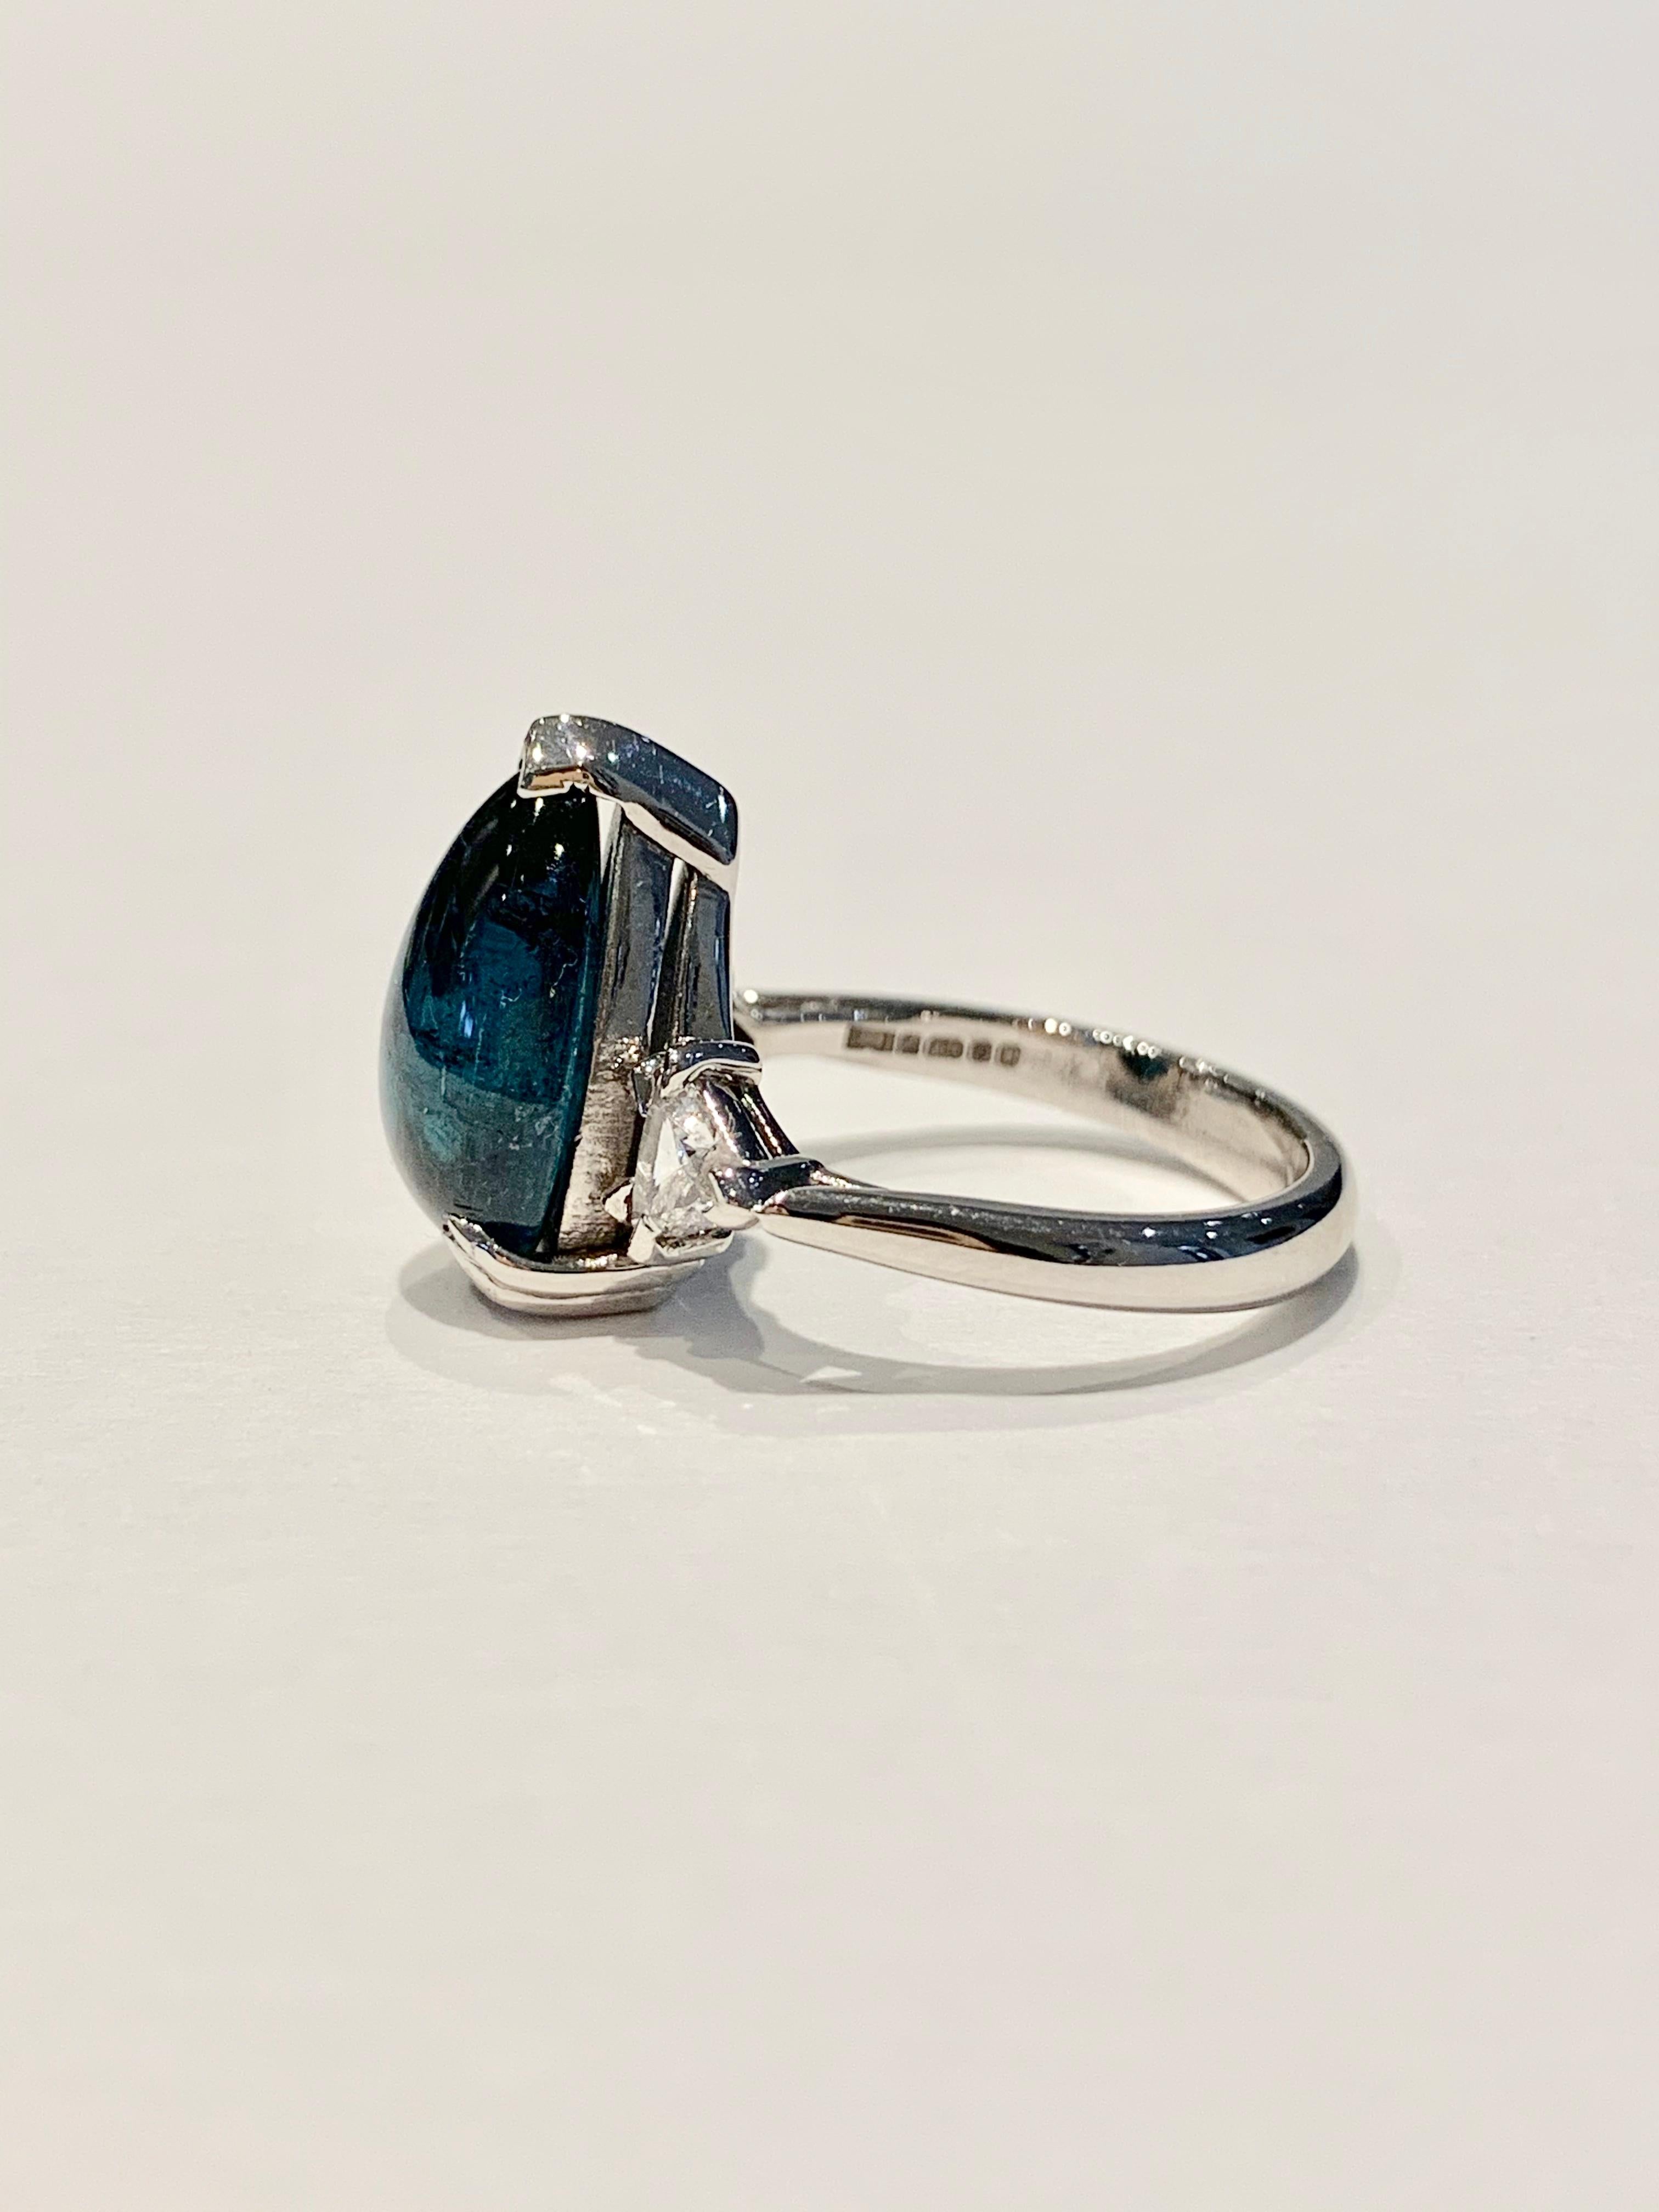 Modern Bespoke 5.27ct Blue Tourmaline Pear Cut Cabochon Diamond Ring in 18ct White Gold For Sale